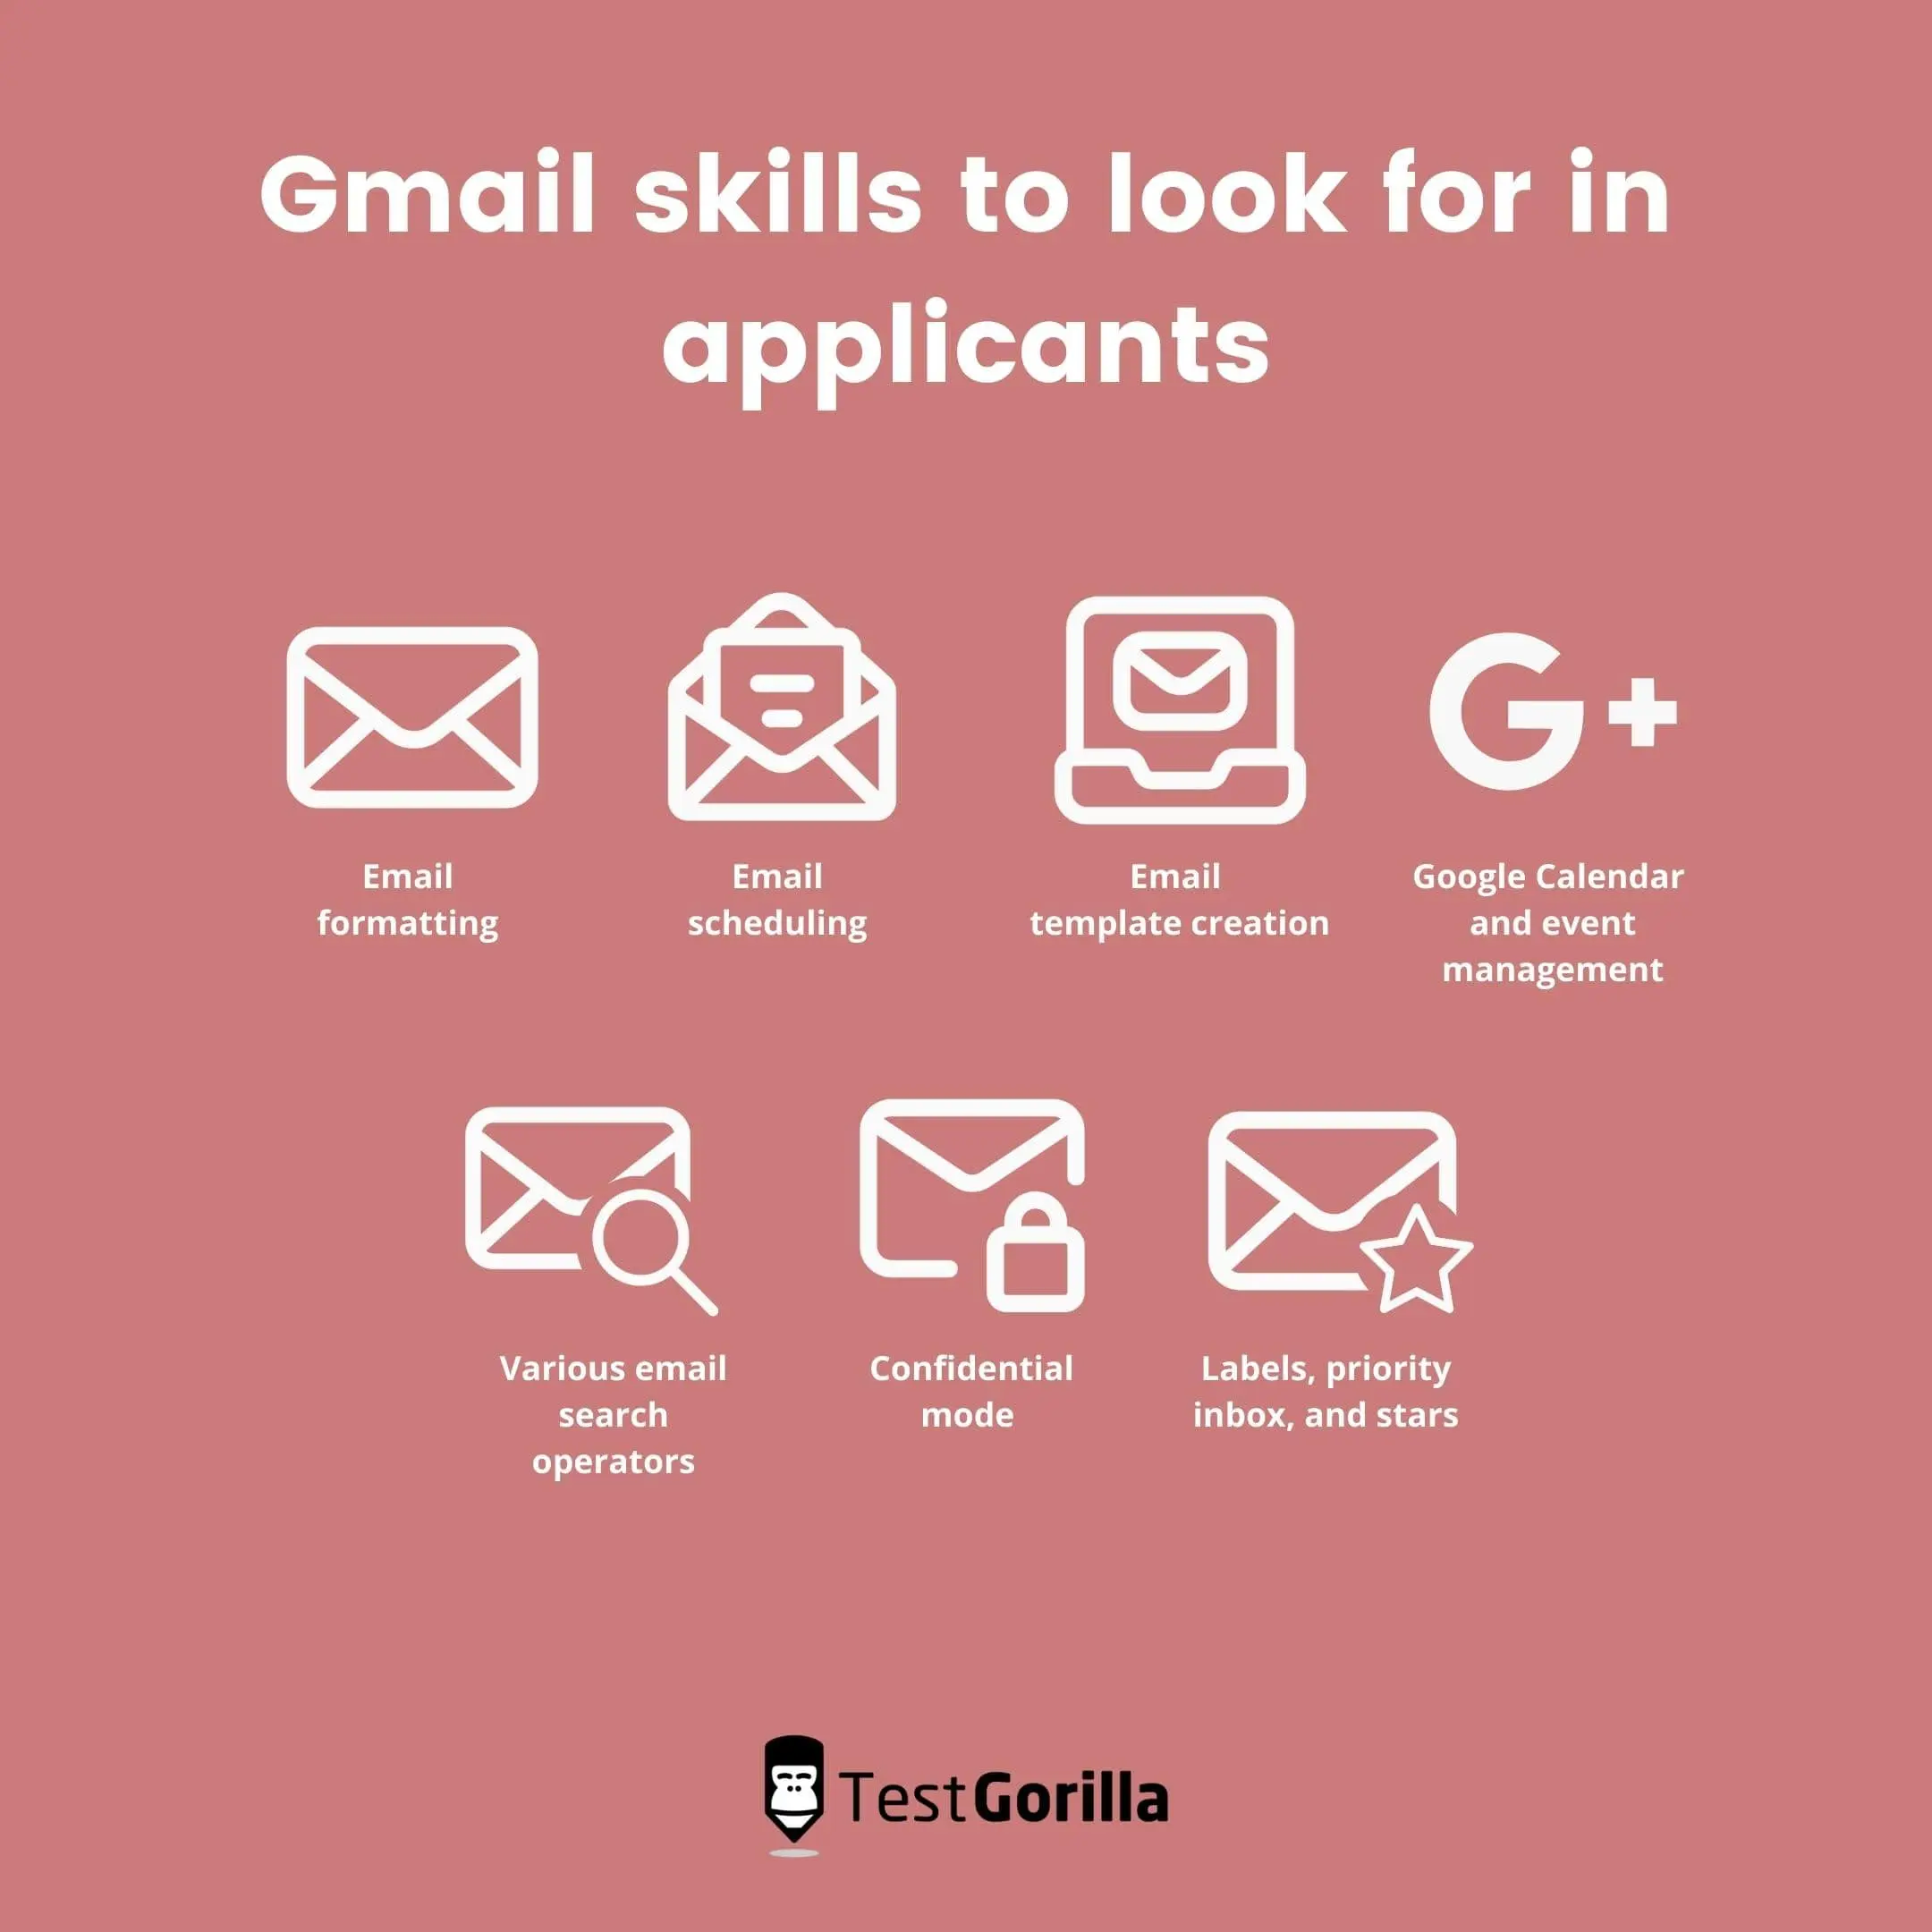 7 Gmail skills to look for in applicants